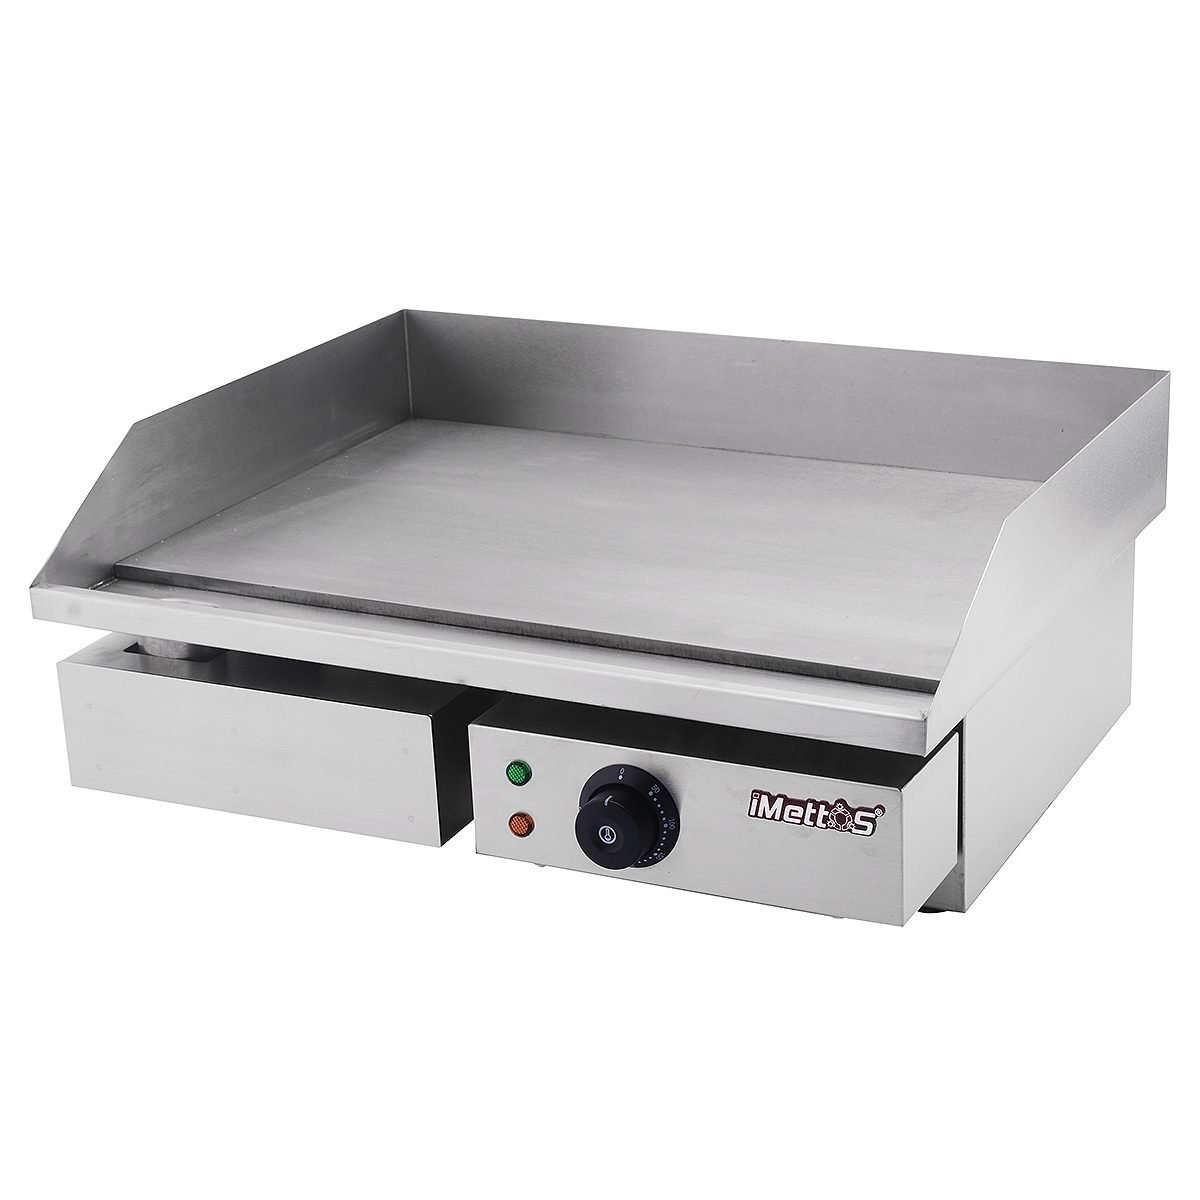 New Imettos 101020 Single Griddle For Sale